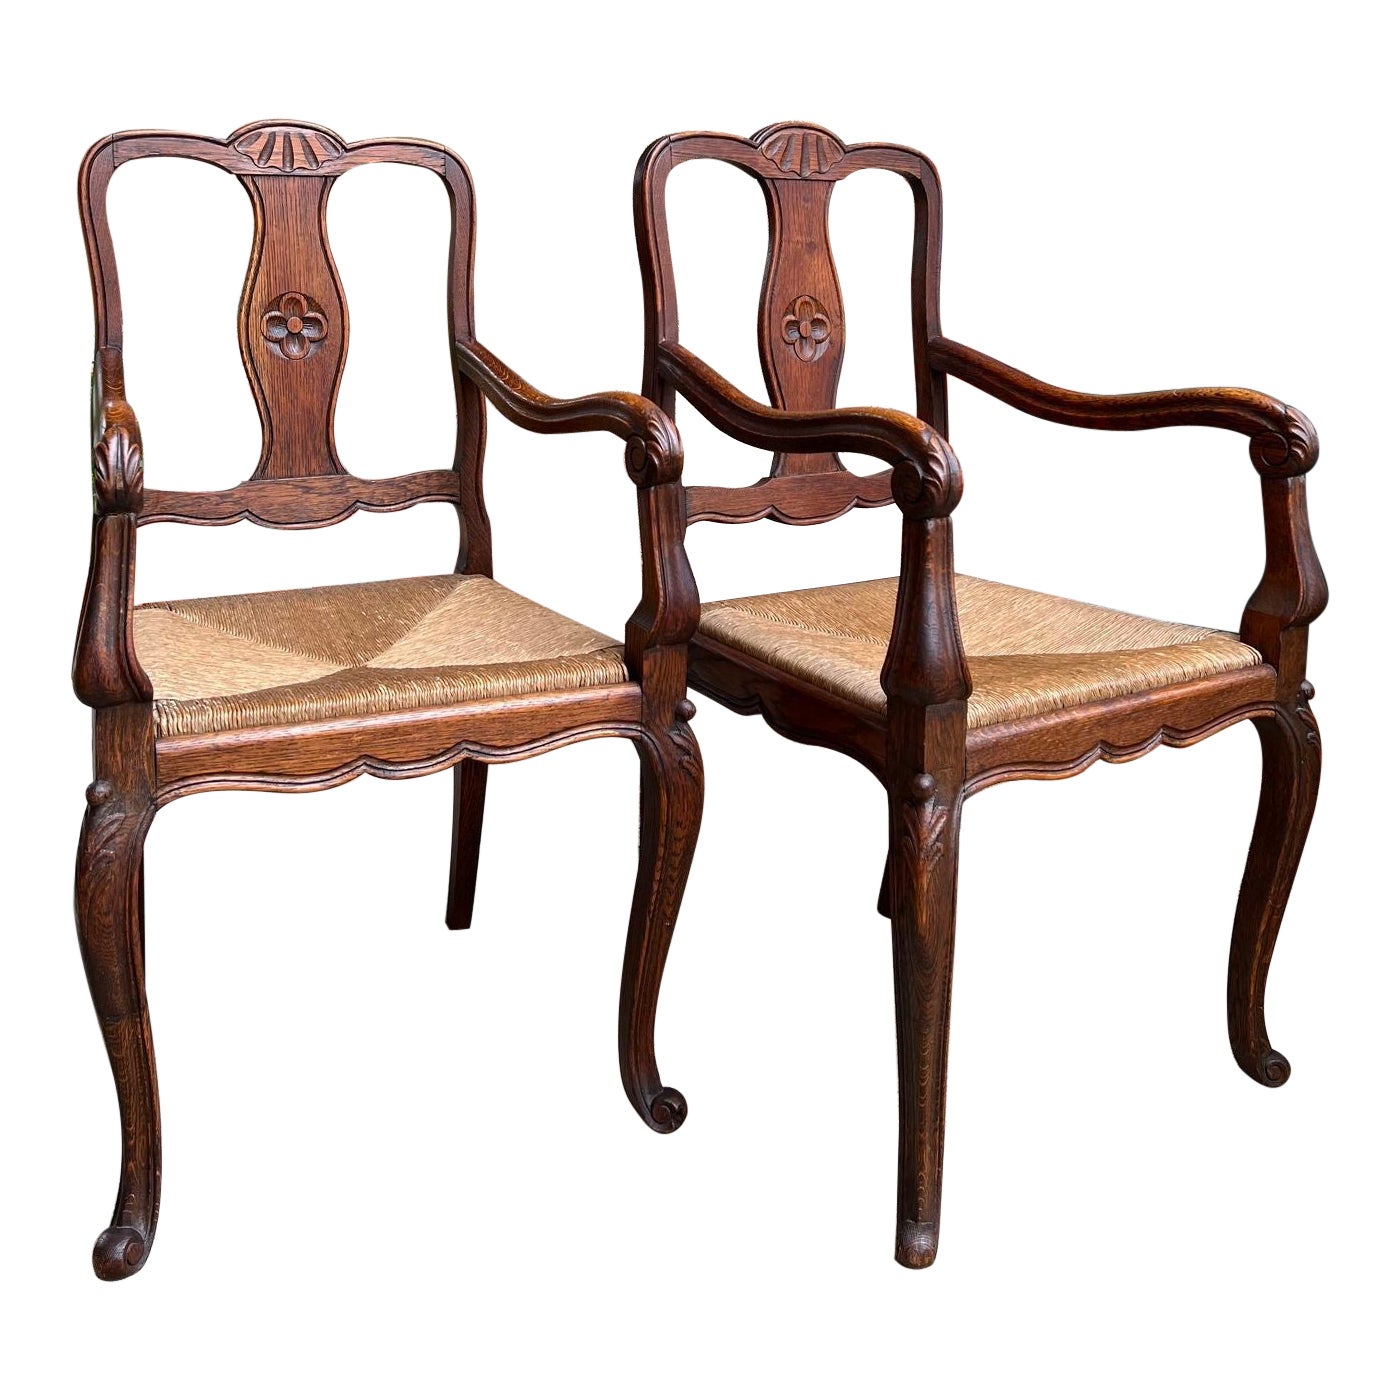 PAIR Antique French Country Carved Oak Dining ARM Chair Rush Seat Set of 2 For Sale